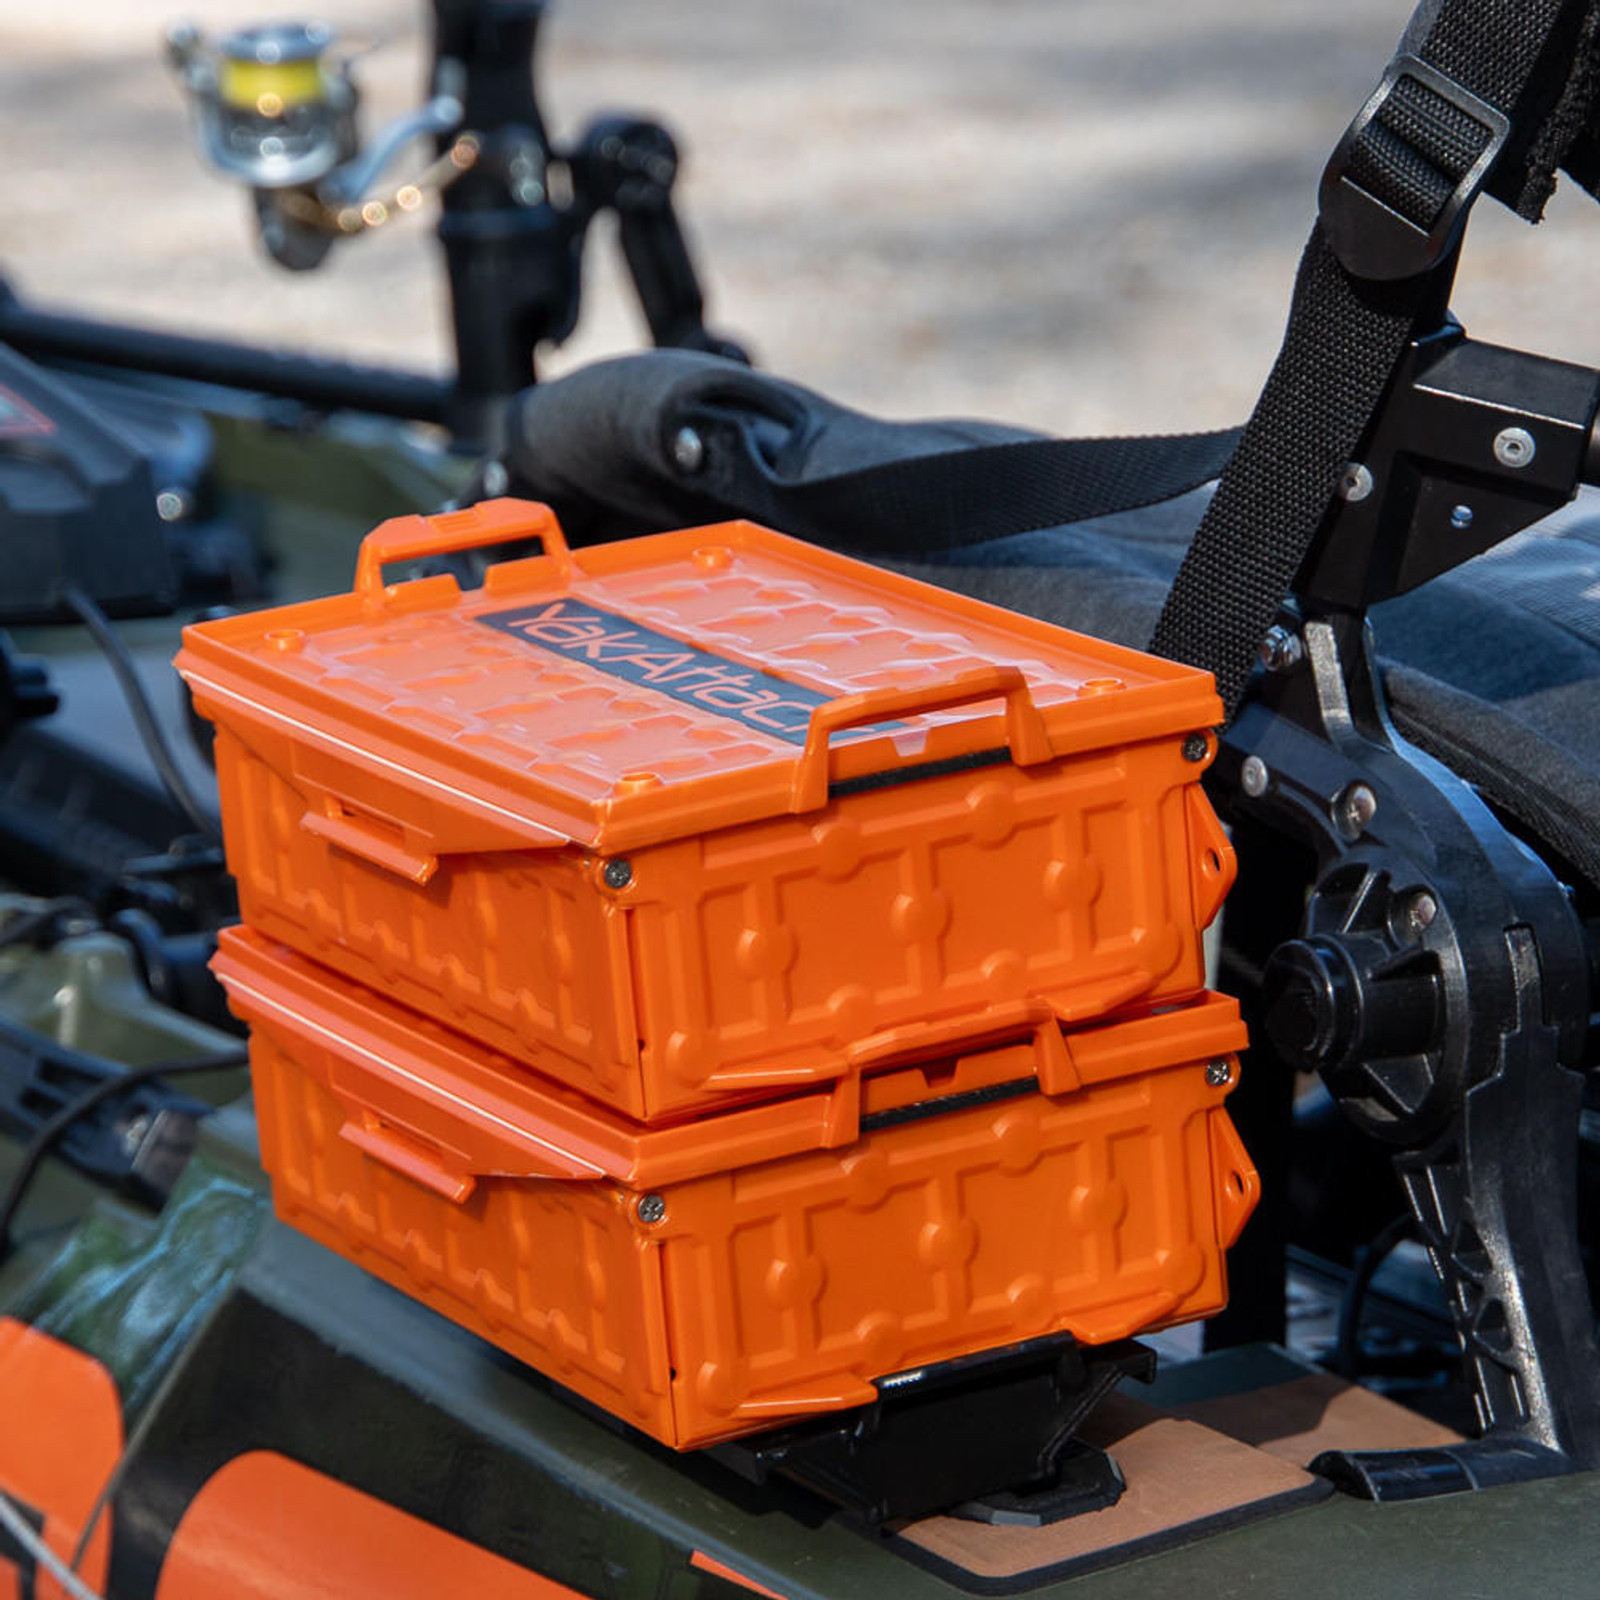  TracPak Combo Kit, Two Boxes and Quick Release Base, Orange 